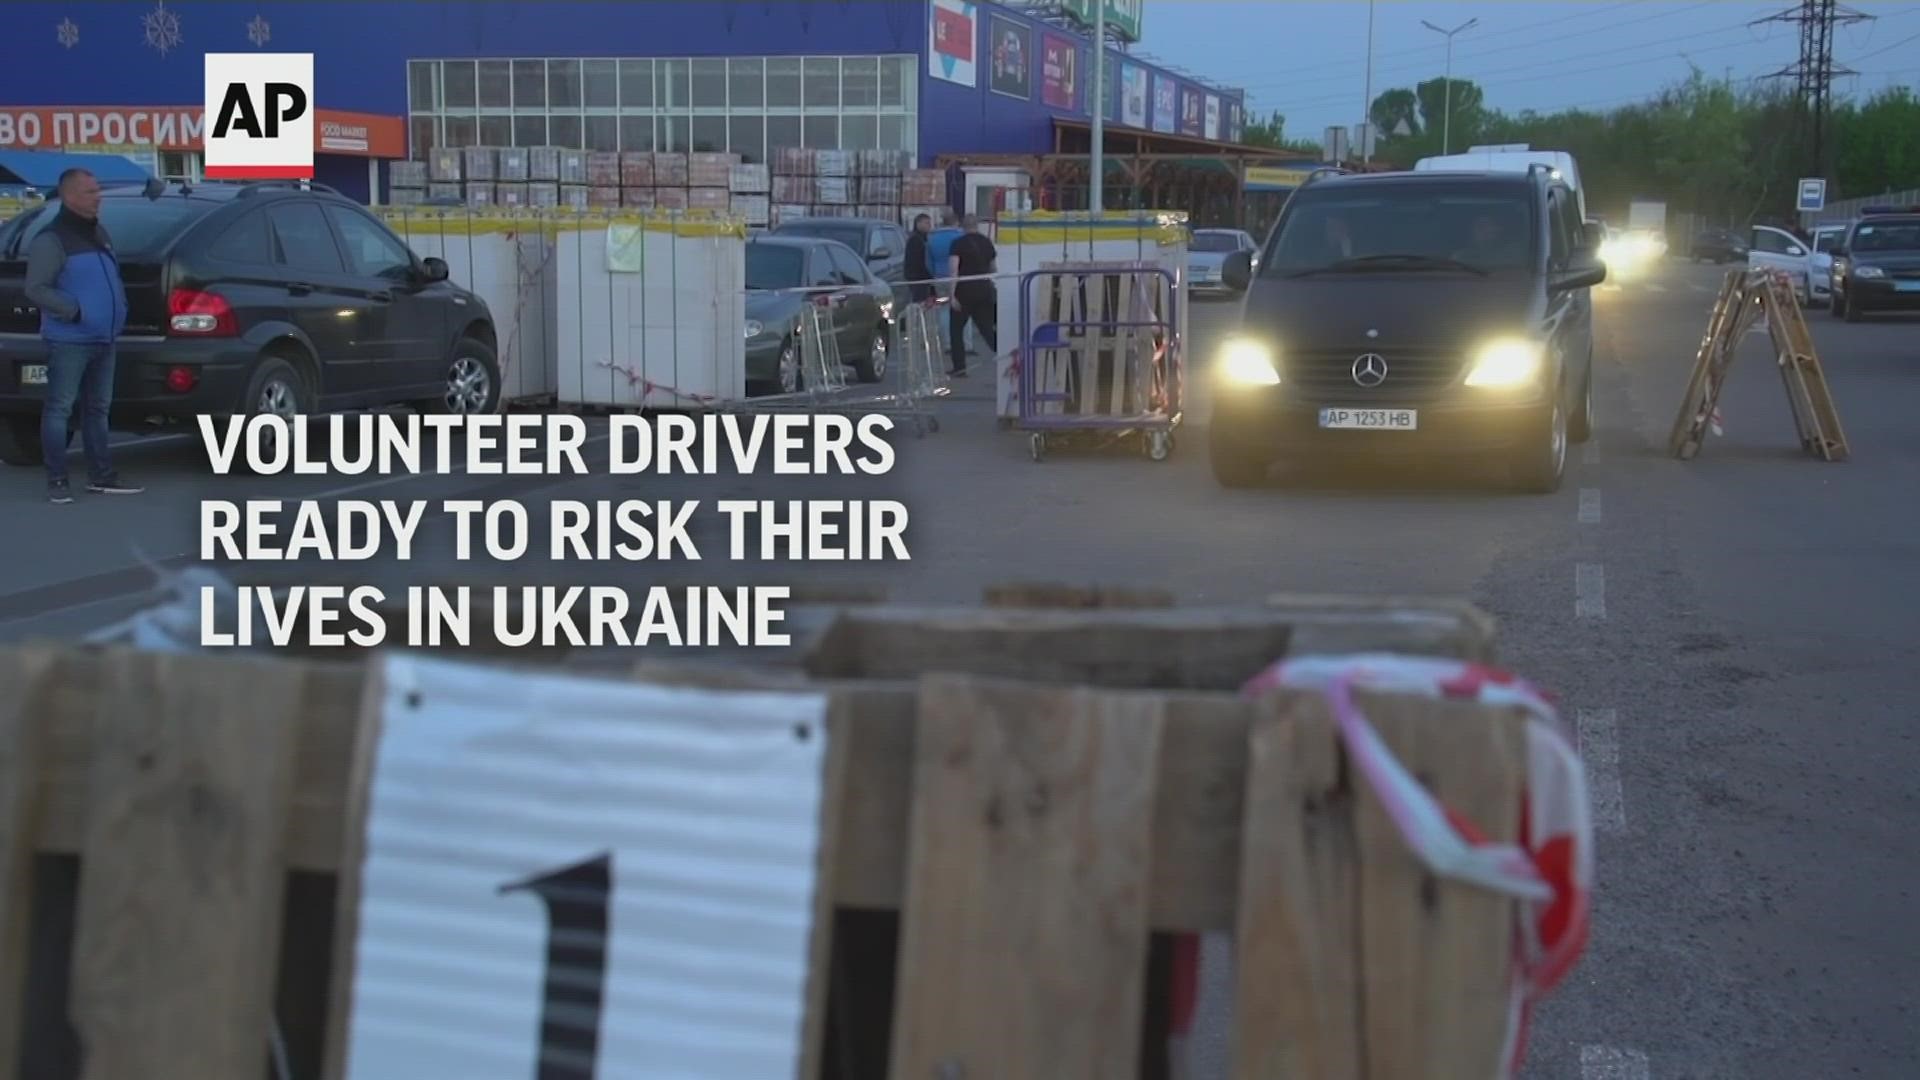 Volunteer drivers are risking everything to deliver humanitarian aid to Ukrainian civilians and get people out.